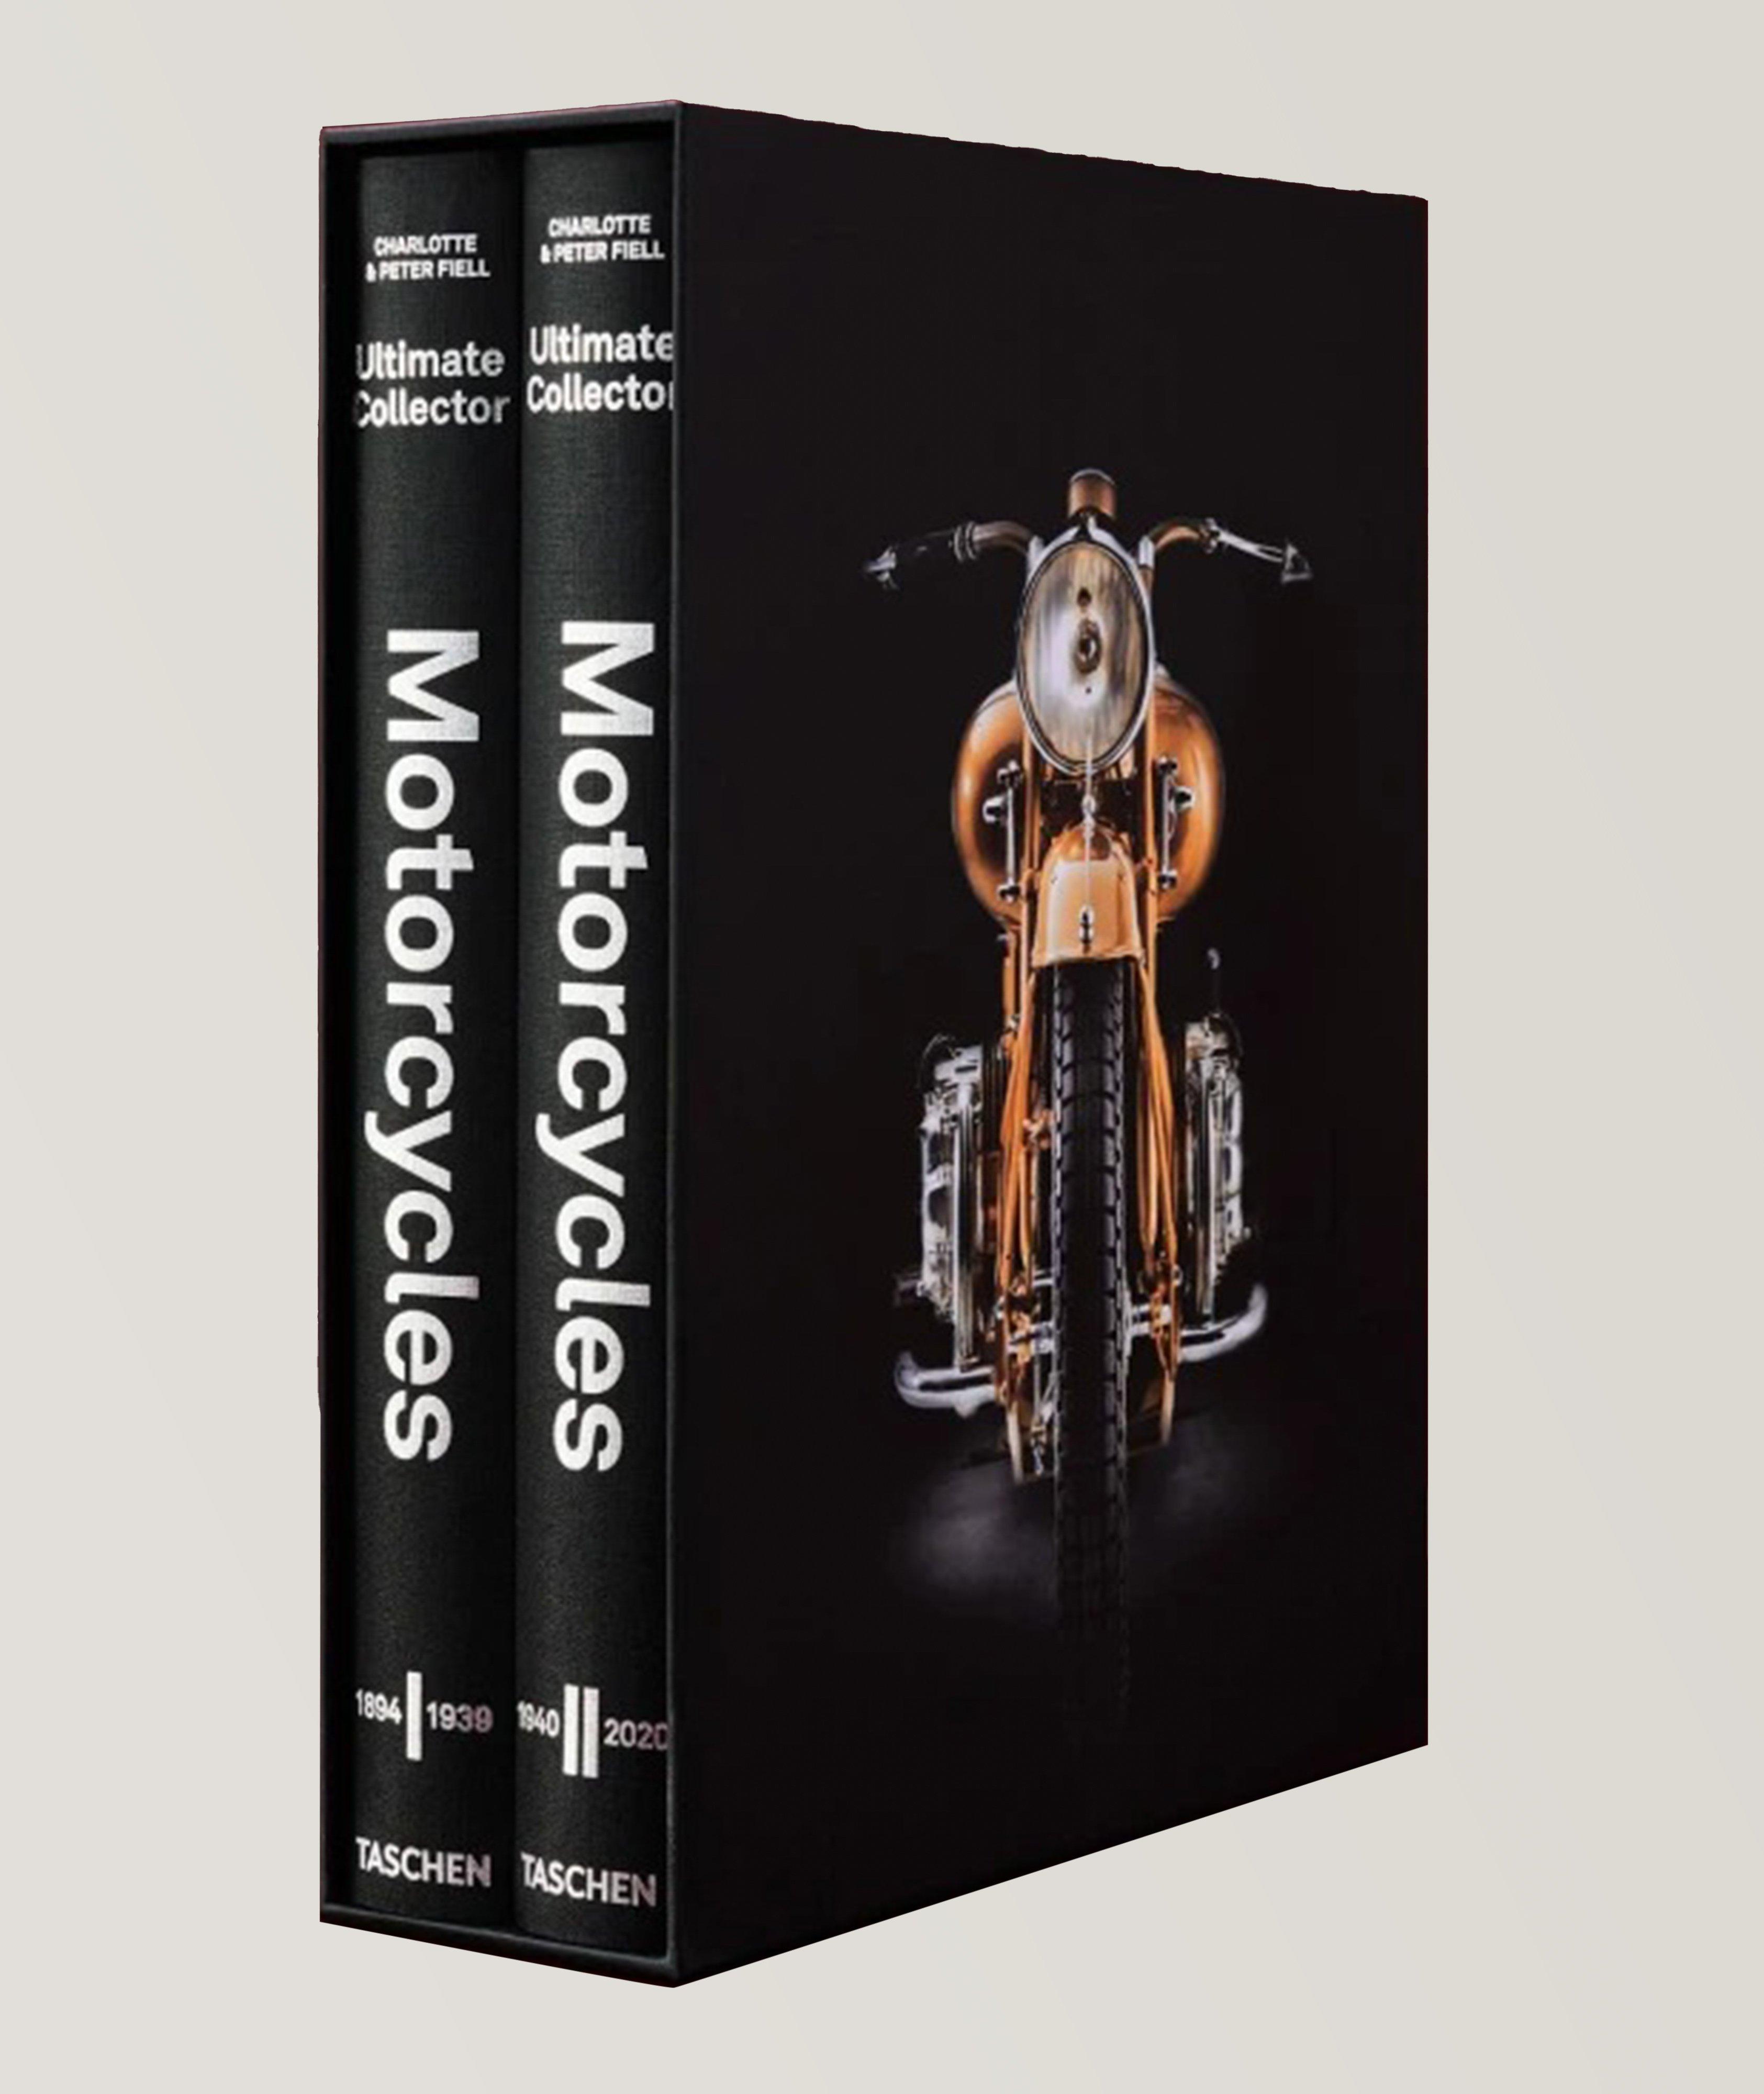 Ultimate Collector Motorcycles Book